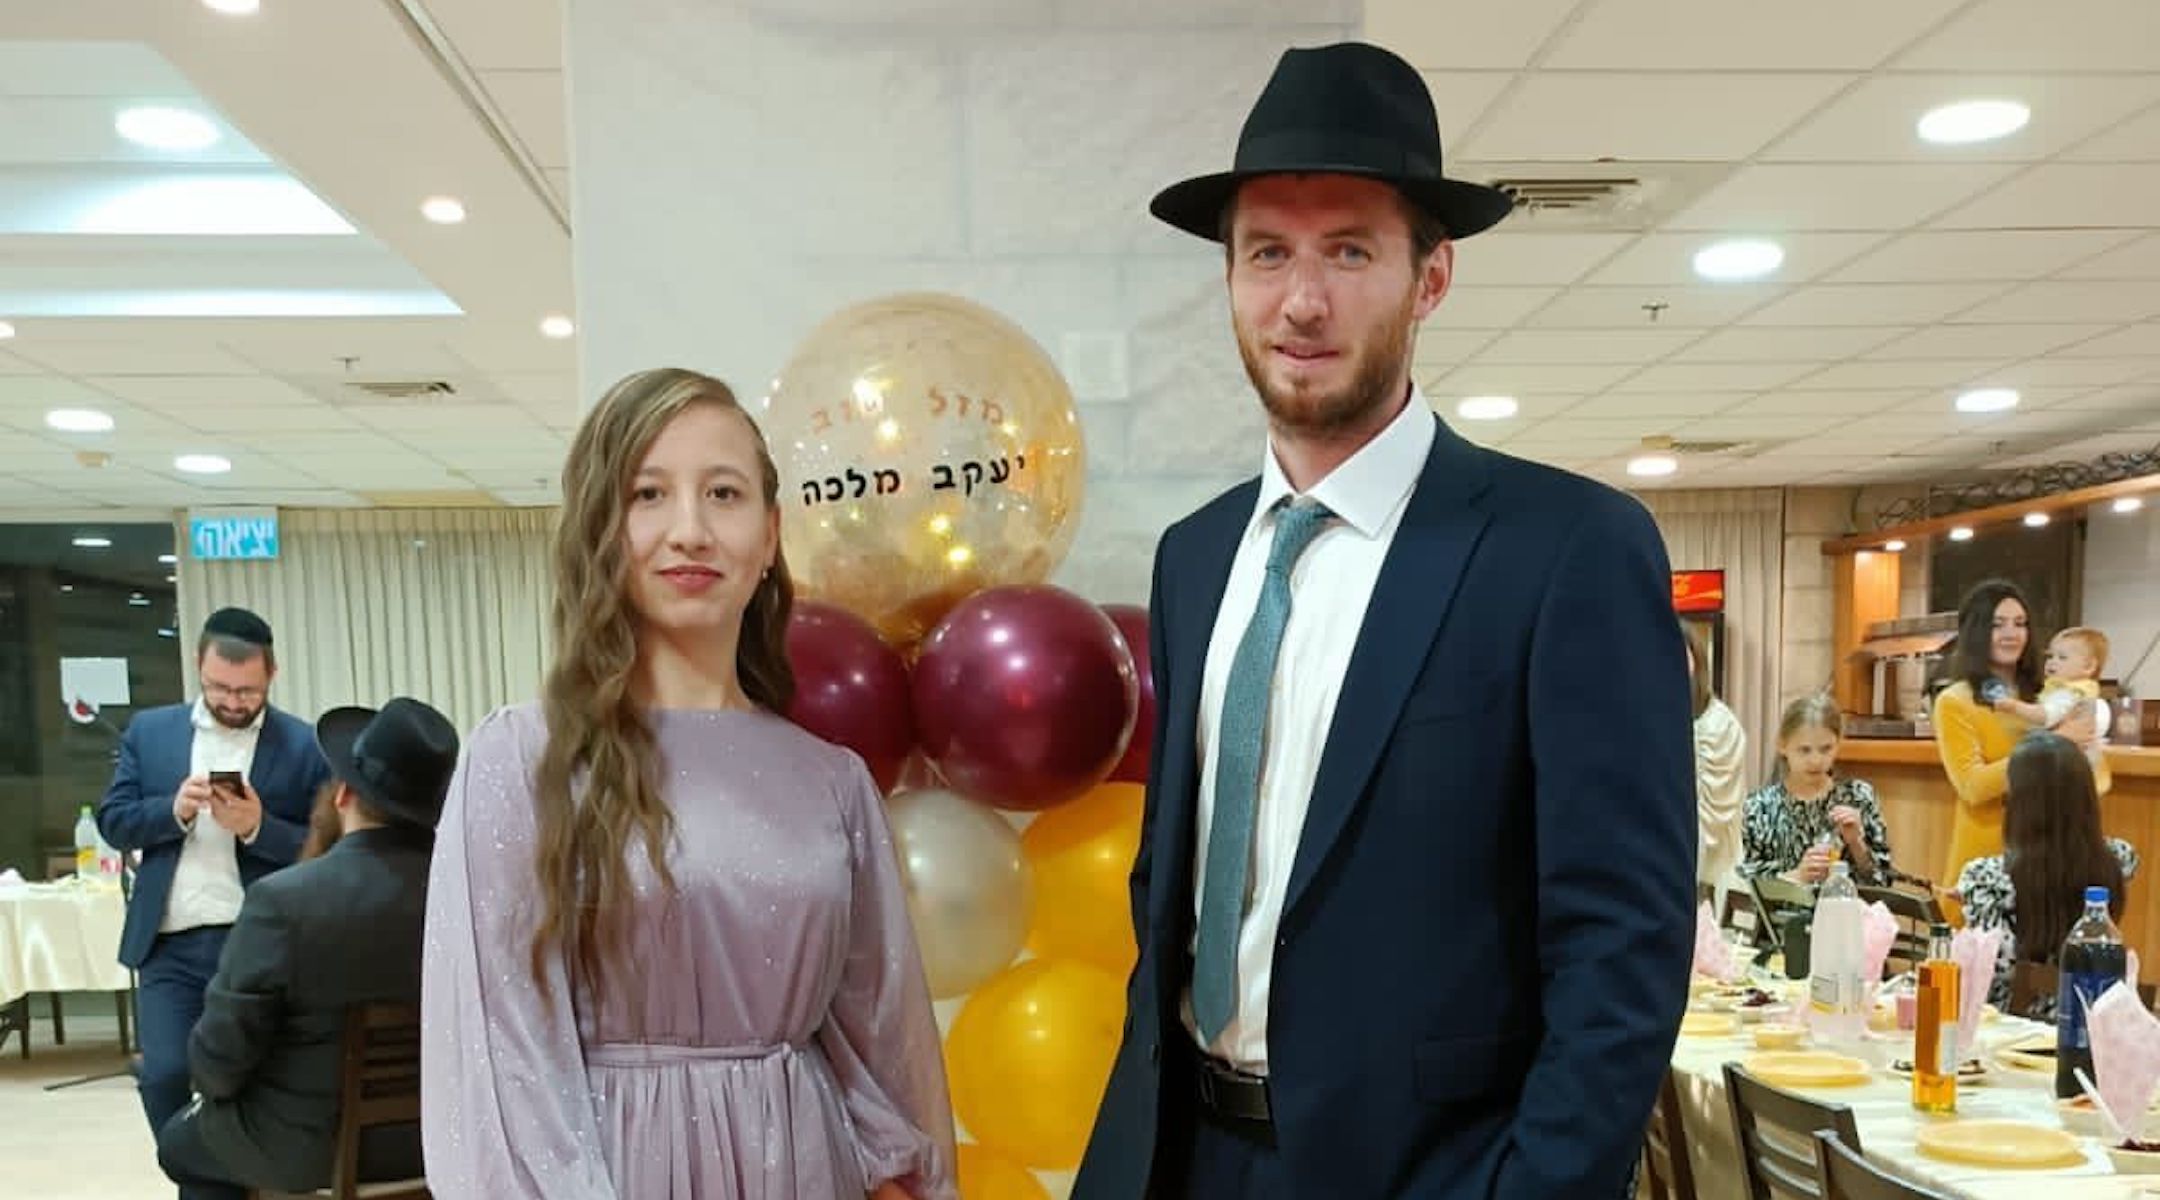 With the help of a NYC synagogue, two young Ukrainian Jewish refugees will soon marry in Israel